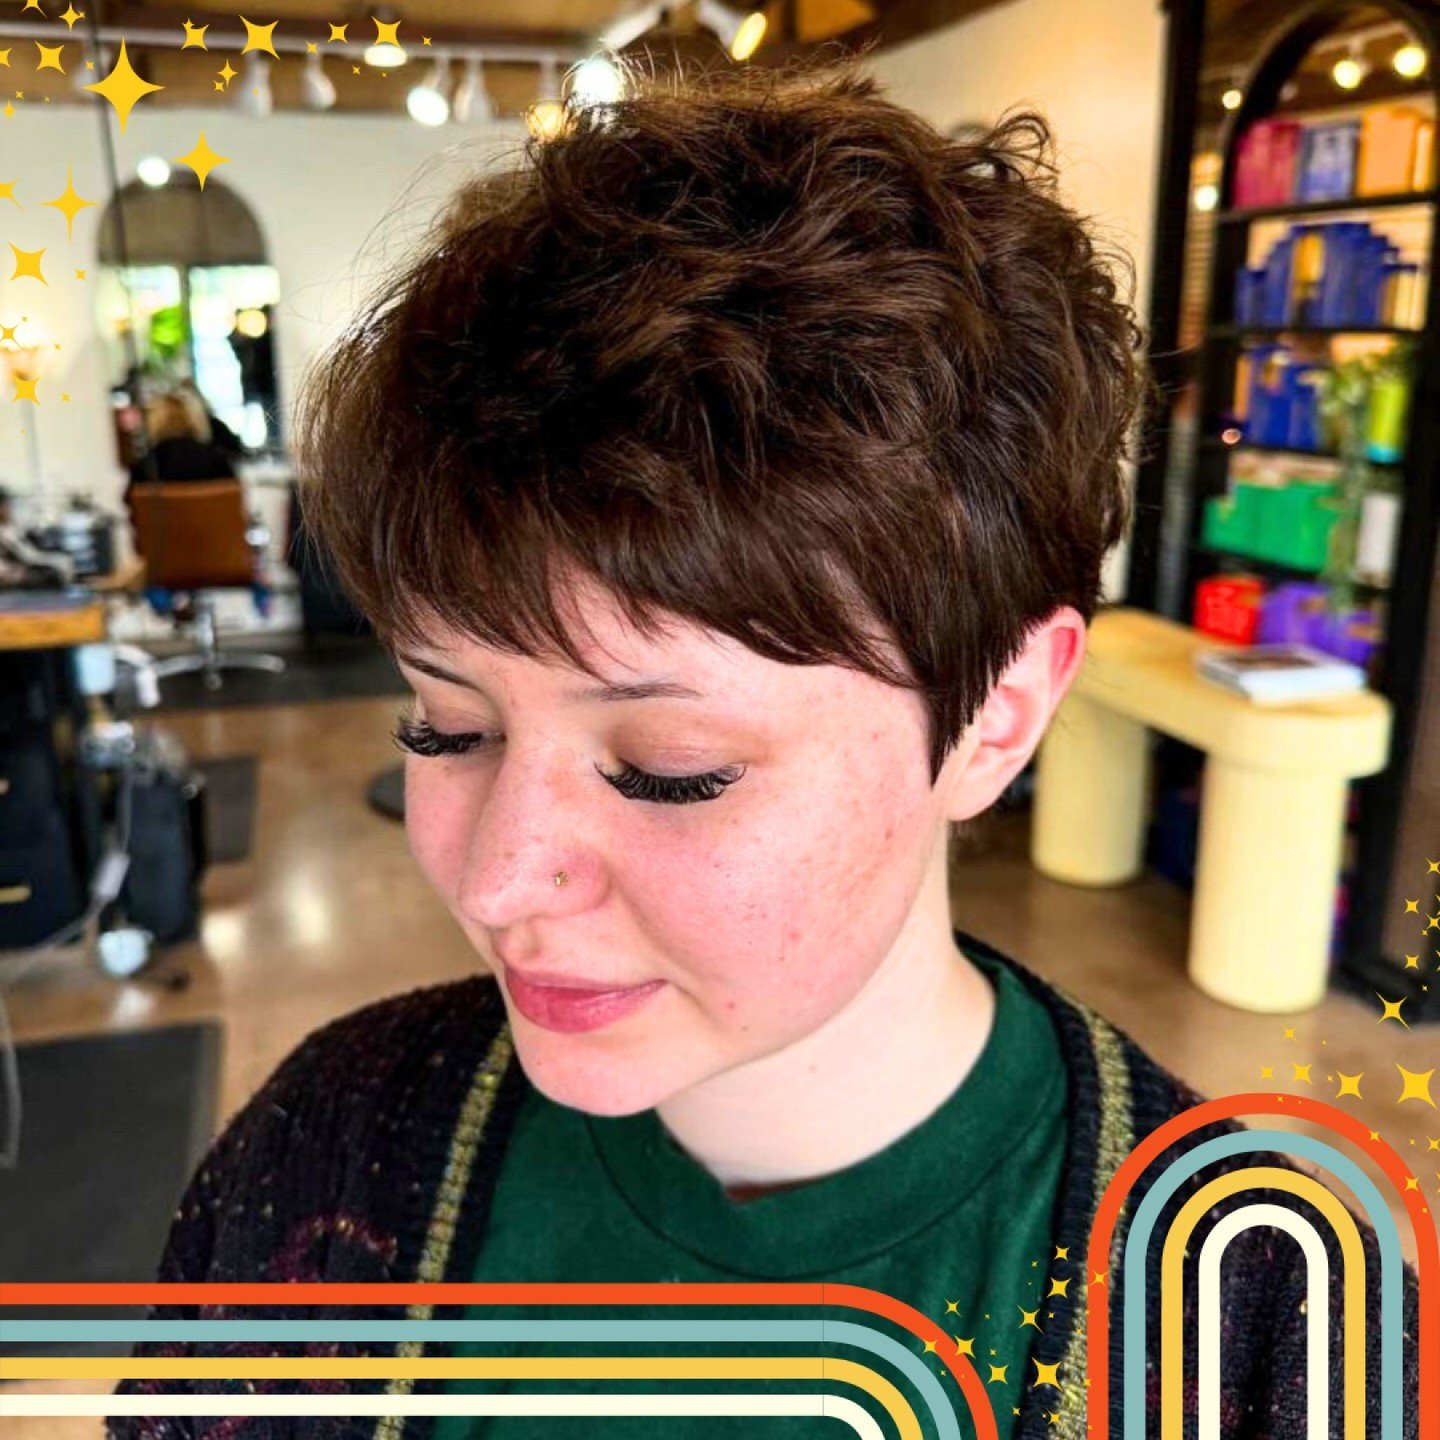 For those who rock the pixie cuts, you know how hard it is to find a good hair cutter. We got one! Check out @kaeleysrockinhair....Book your appointment, follow the link in bio!
*
*
*
*
*
#randco #randcocolor #randcolove #phoenixaz #phoenixazsalon #s